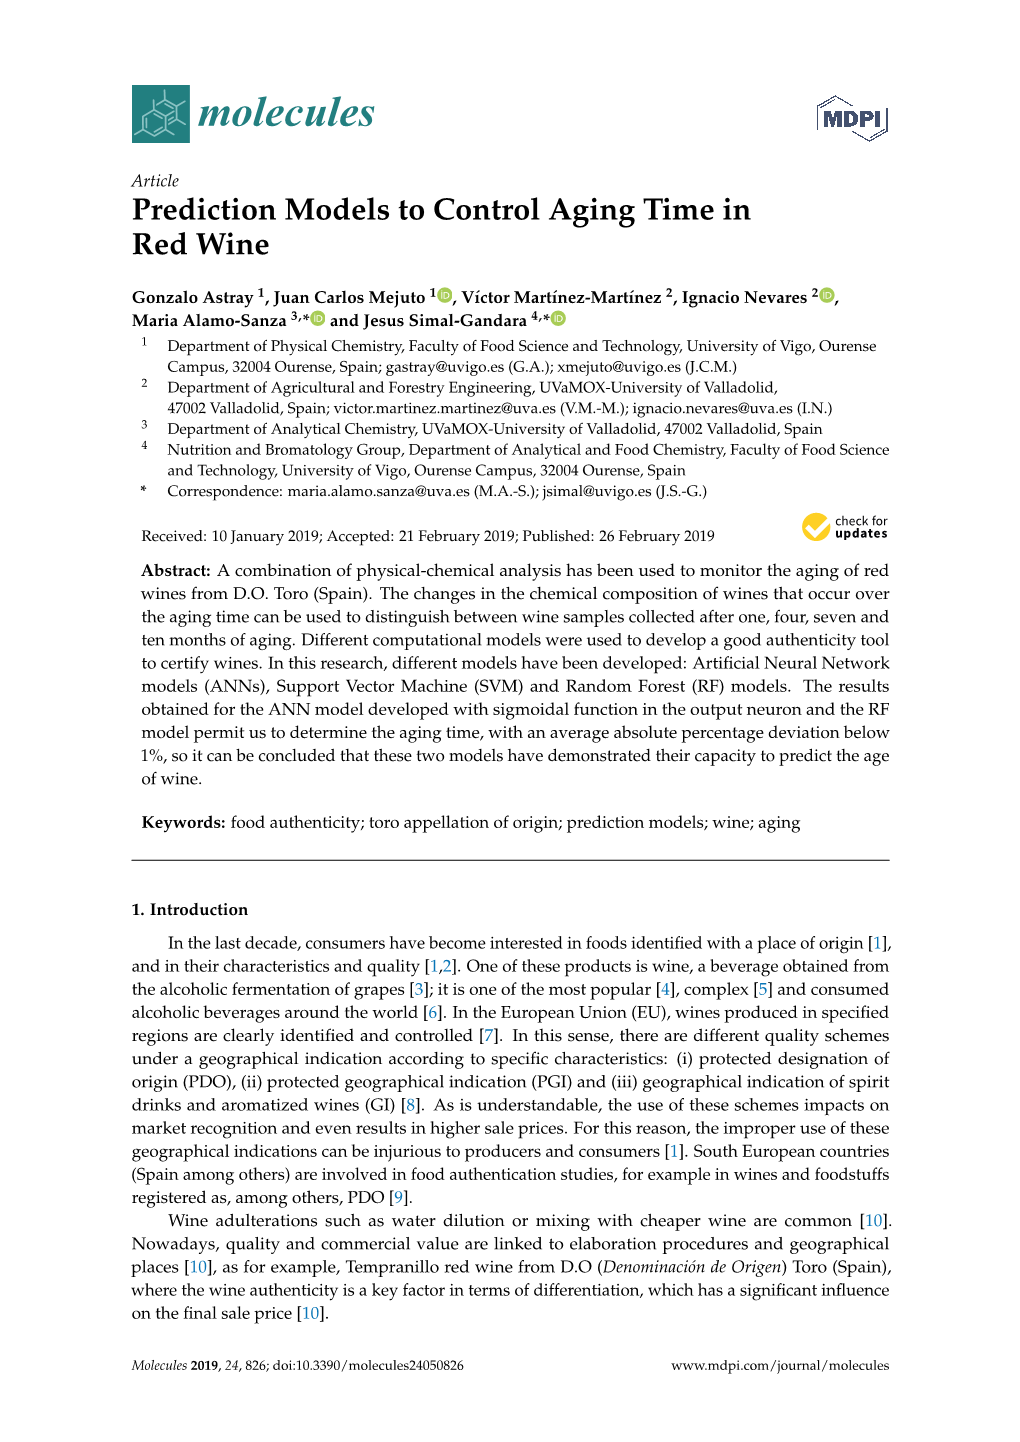 Prediction Models to Control Aging Time in Red Wine